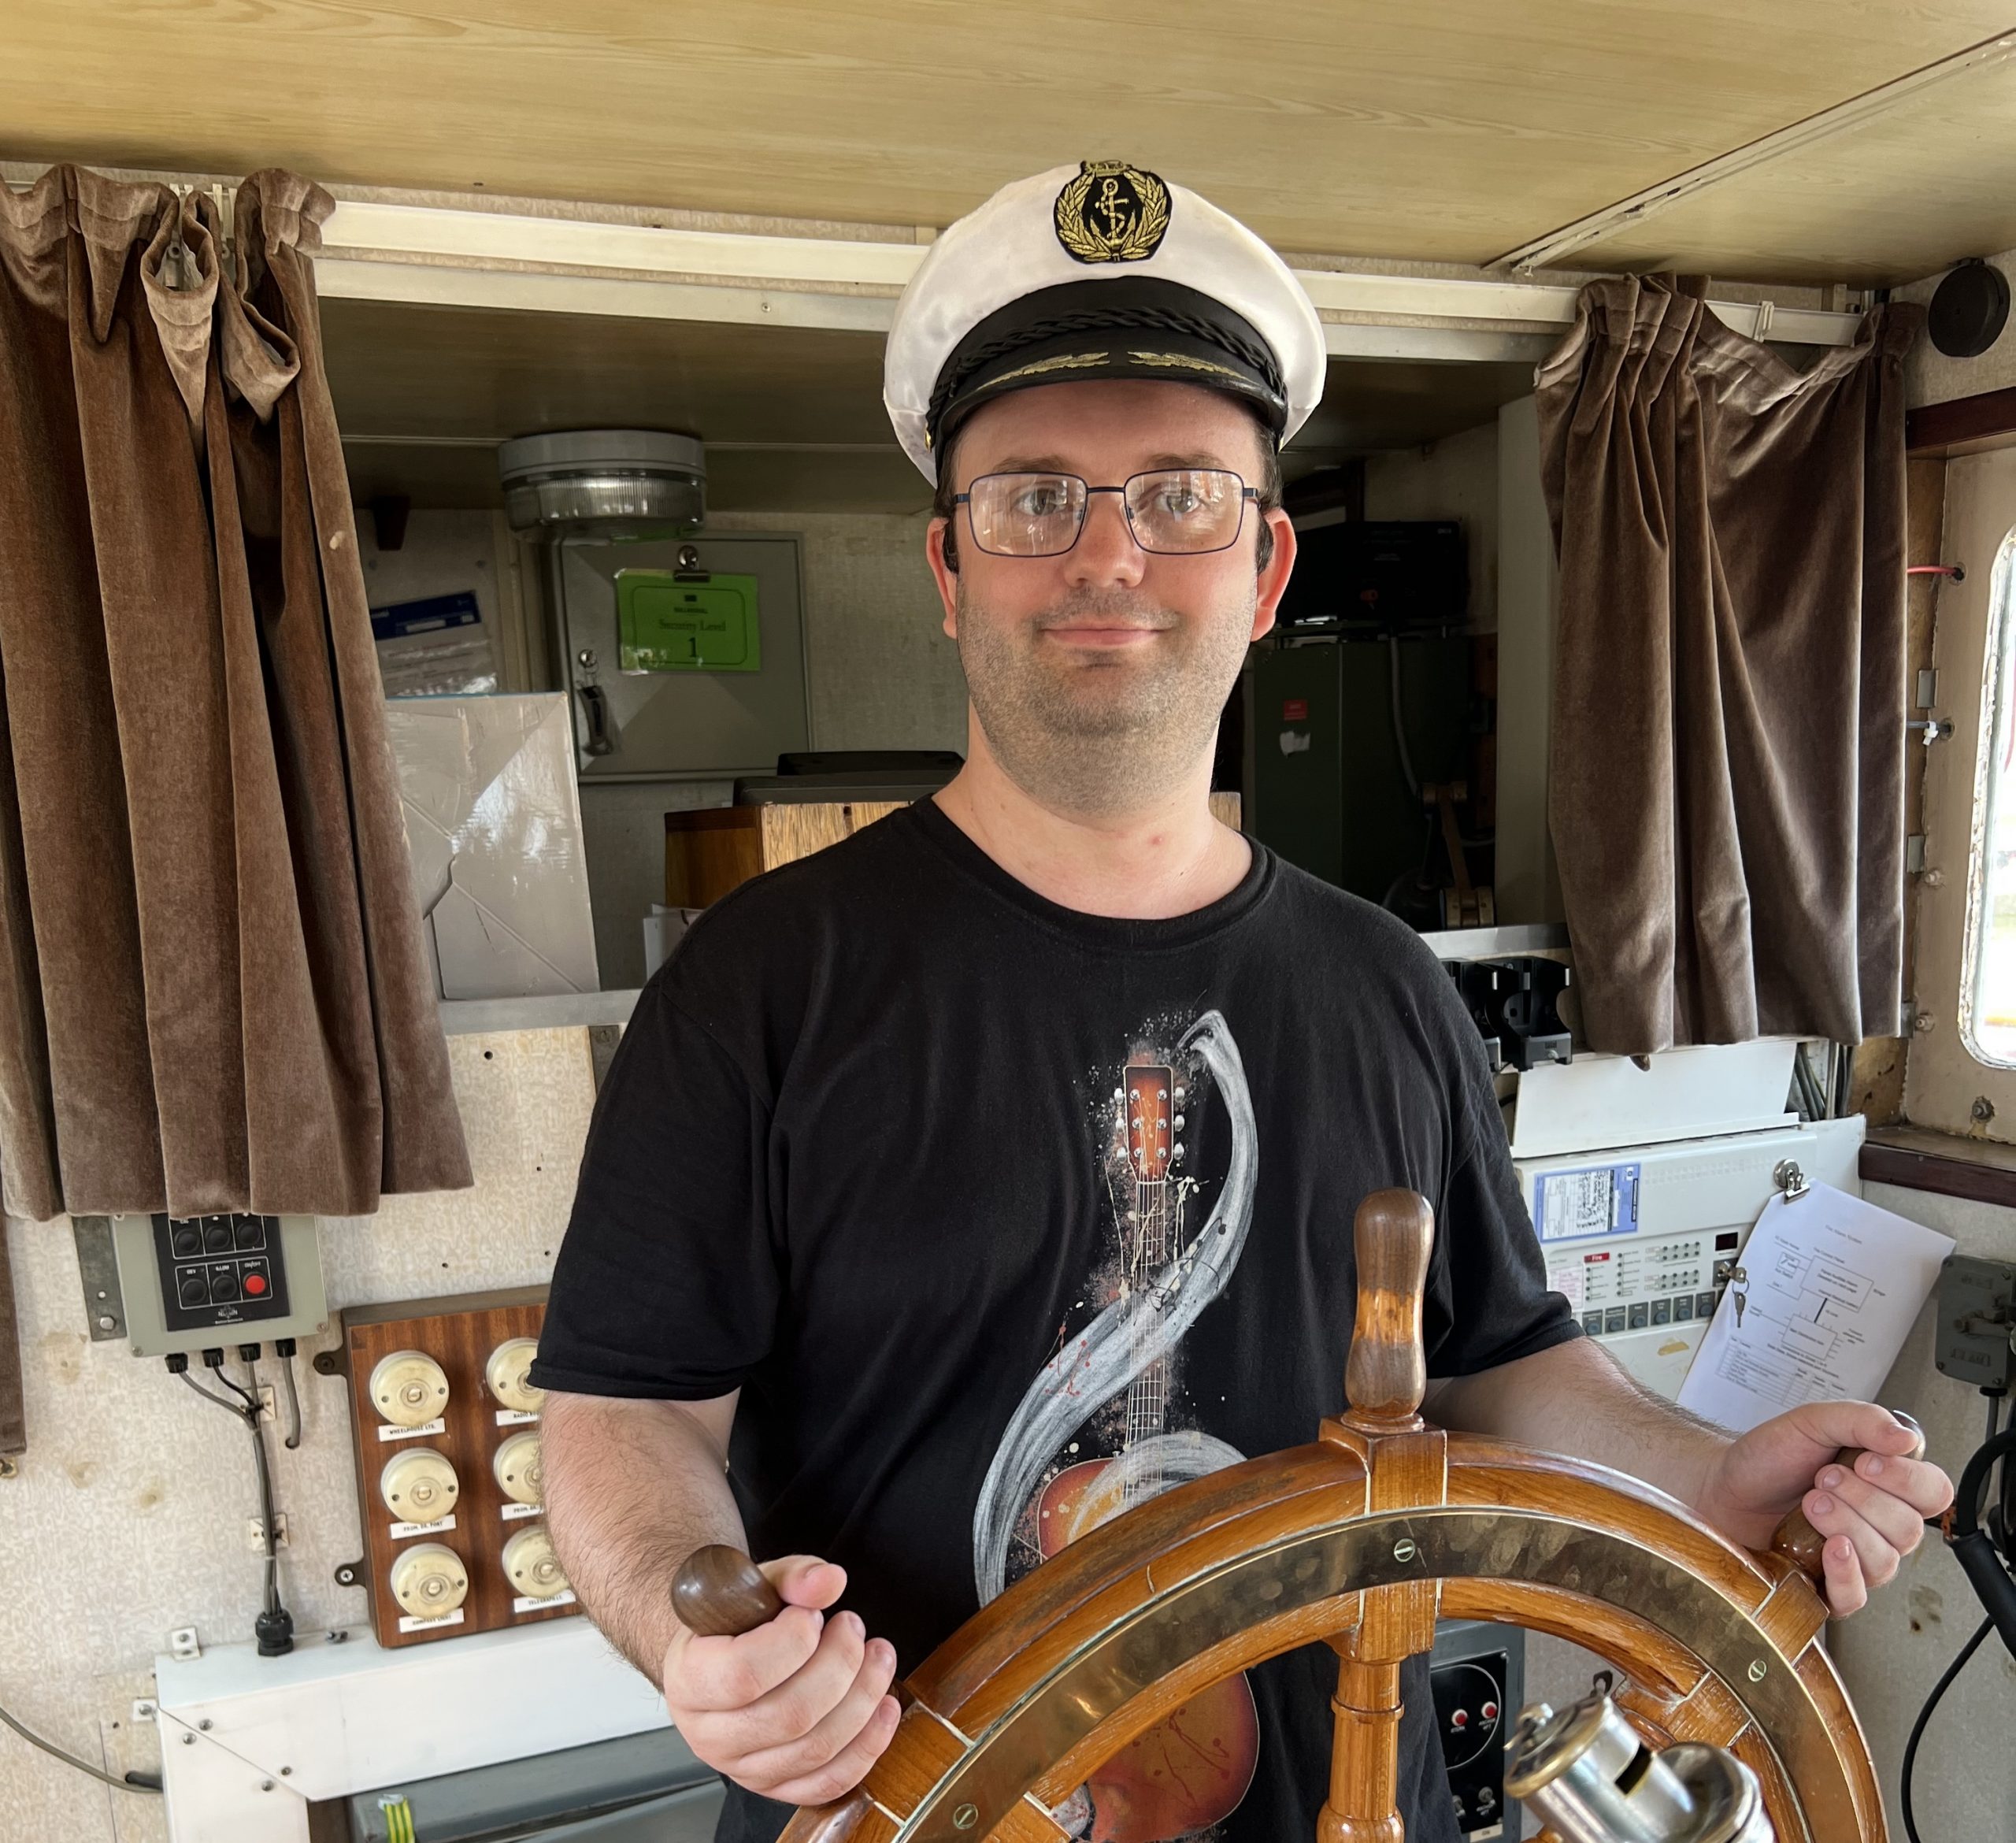 karl steering a ship wheel in a sailors hat